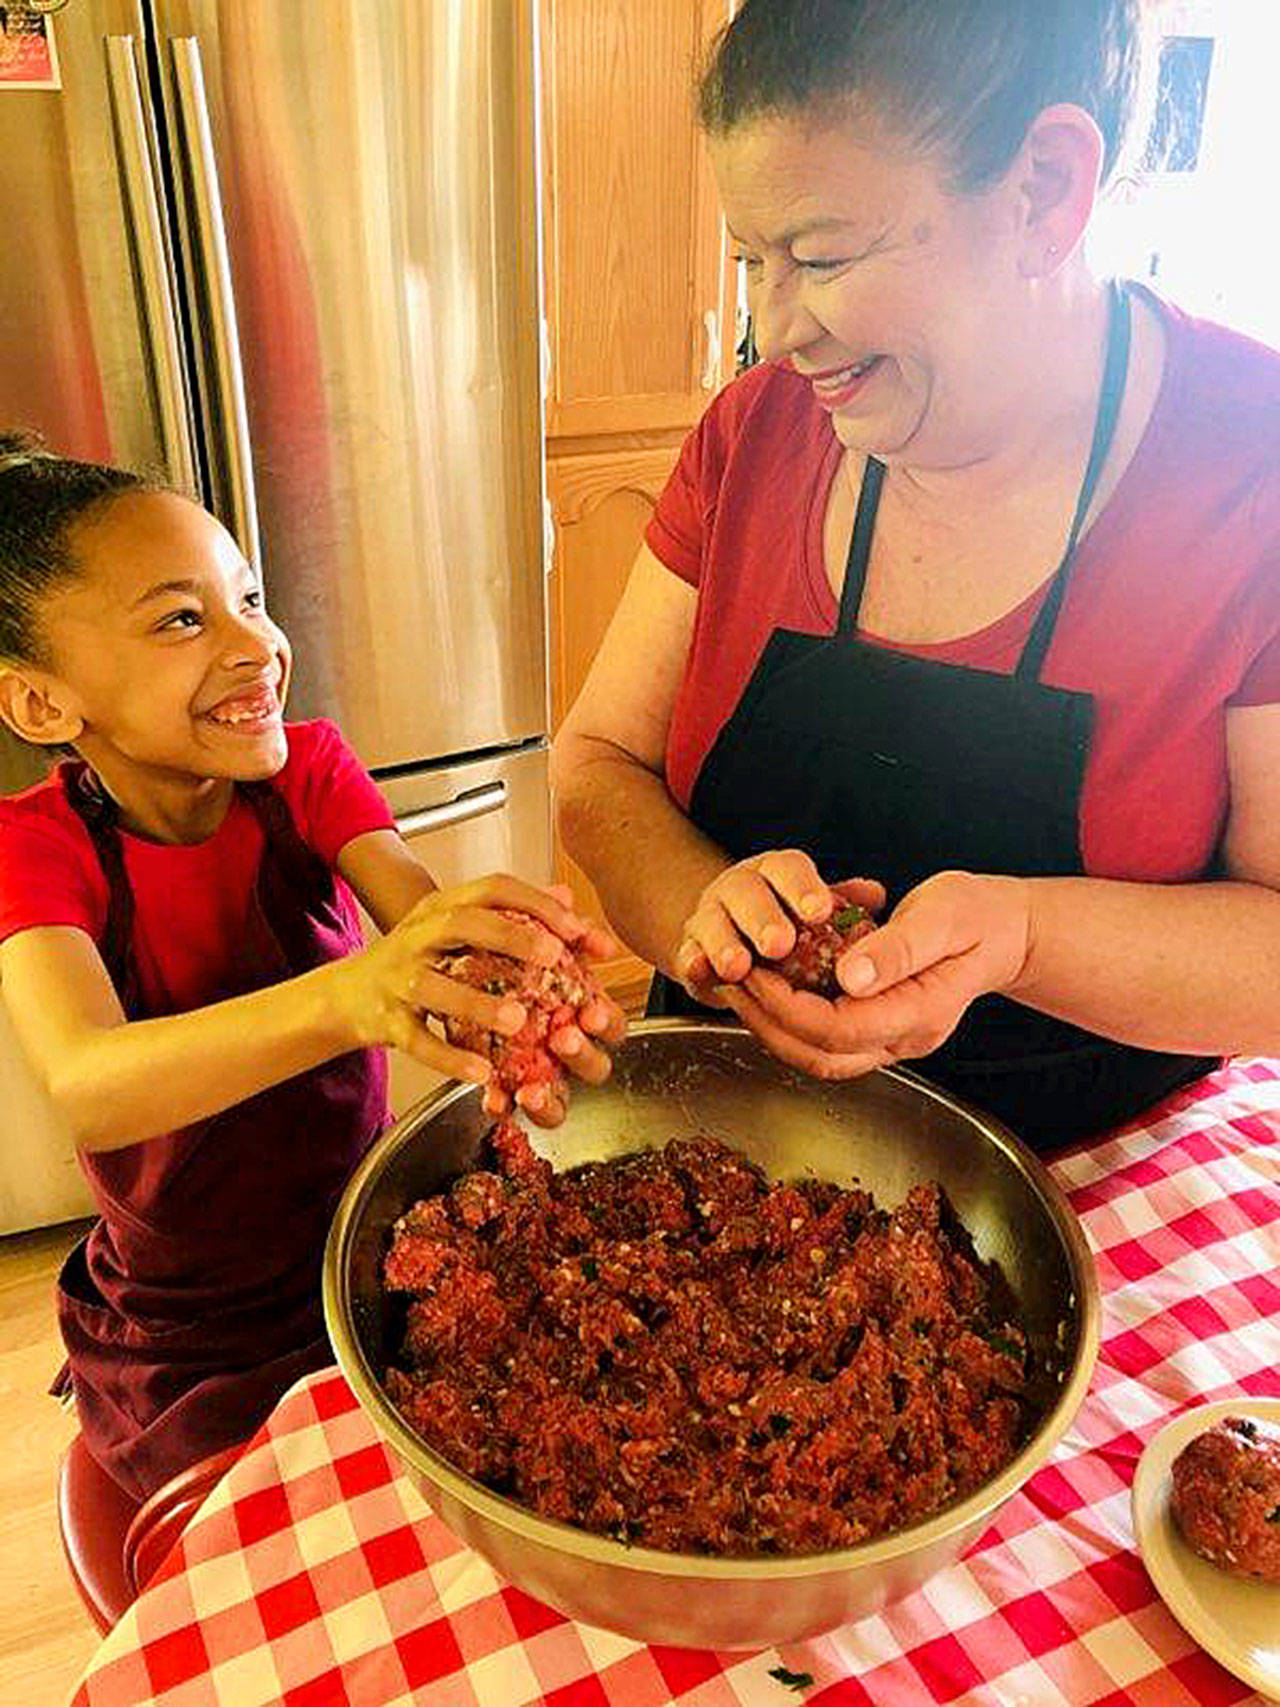 Photo provided                                “Auntie” Jackie Huerta often has her 8-year-old granddaughter, Naomi Jean, to help her in the kitchen.